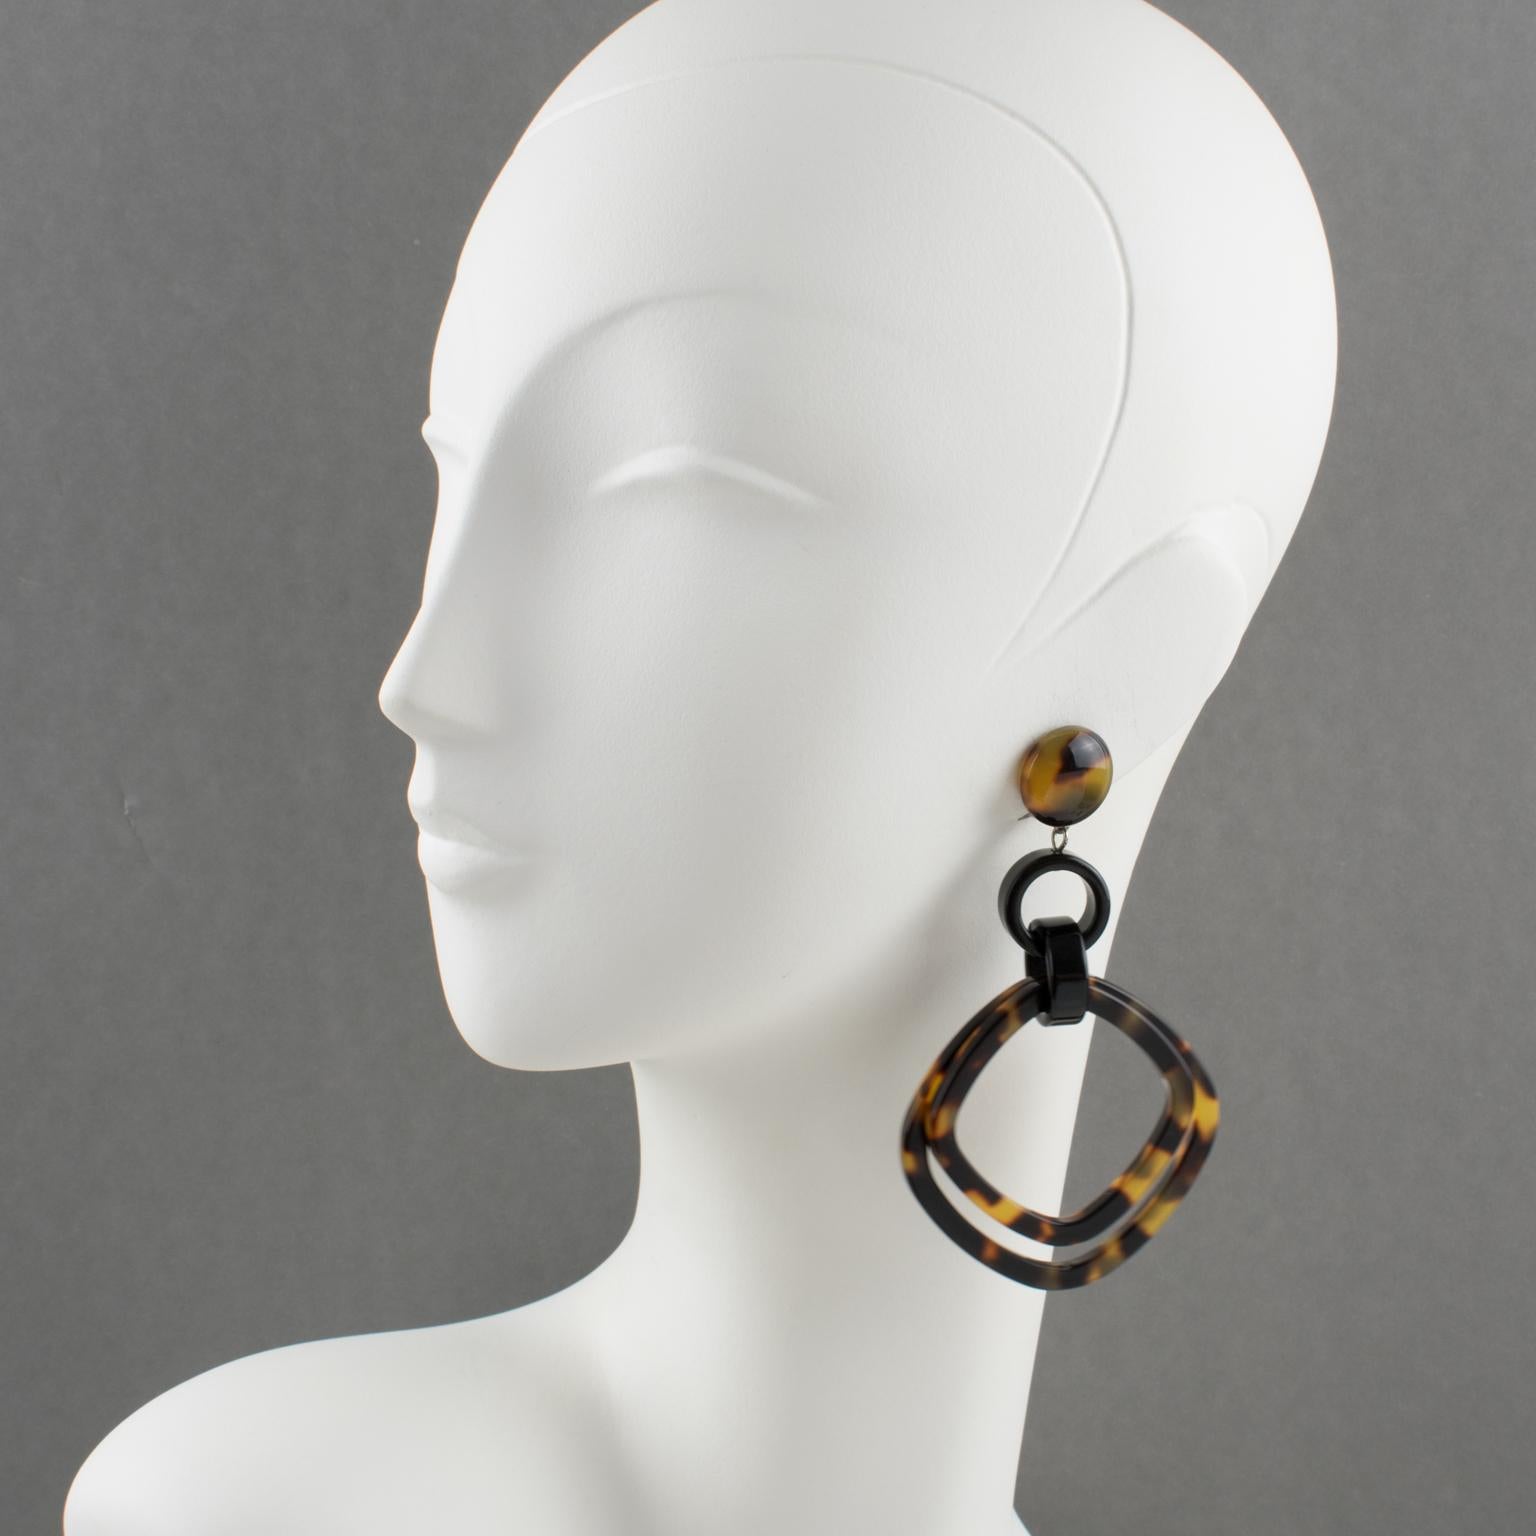 Elegant, made in Italy, resin clip-on earrings designed by Angela Caputi. A dangling shape with black resin geometric links contrasted with large geometric hoops in a tortoise textured pattern. Her matching of colors is always extremely classy,